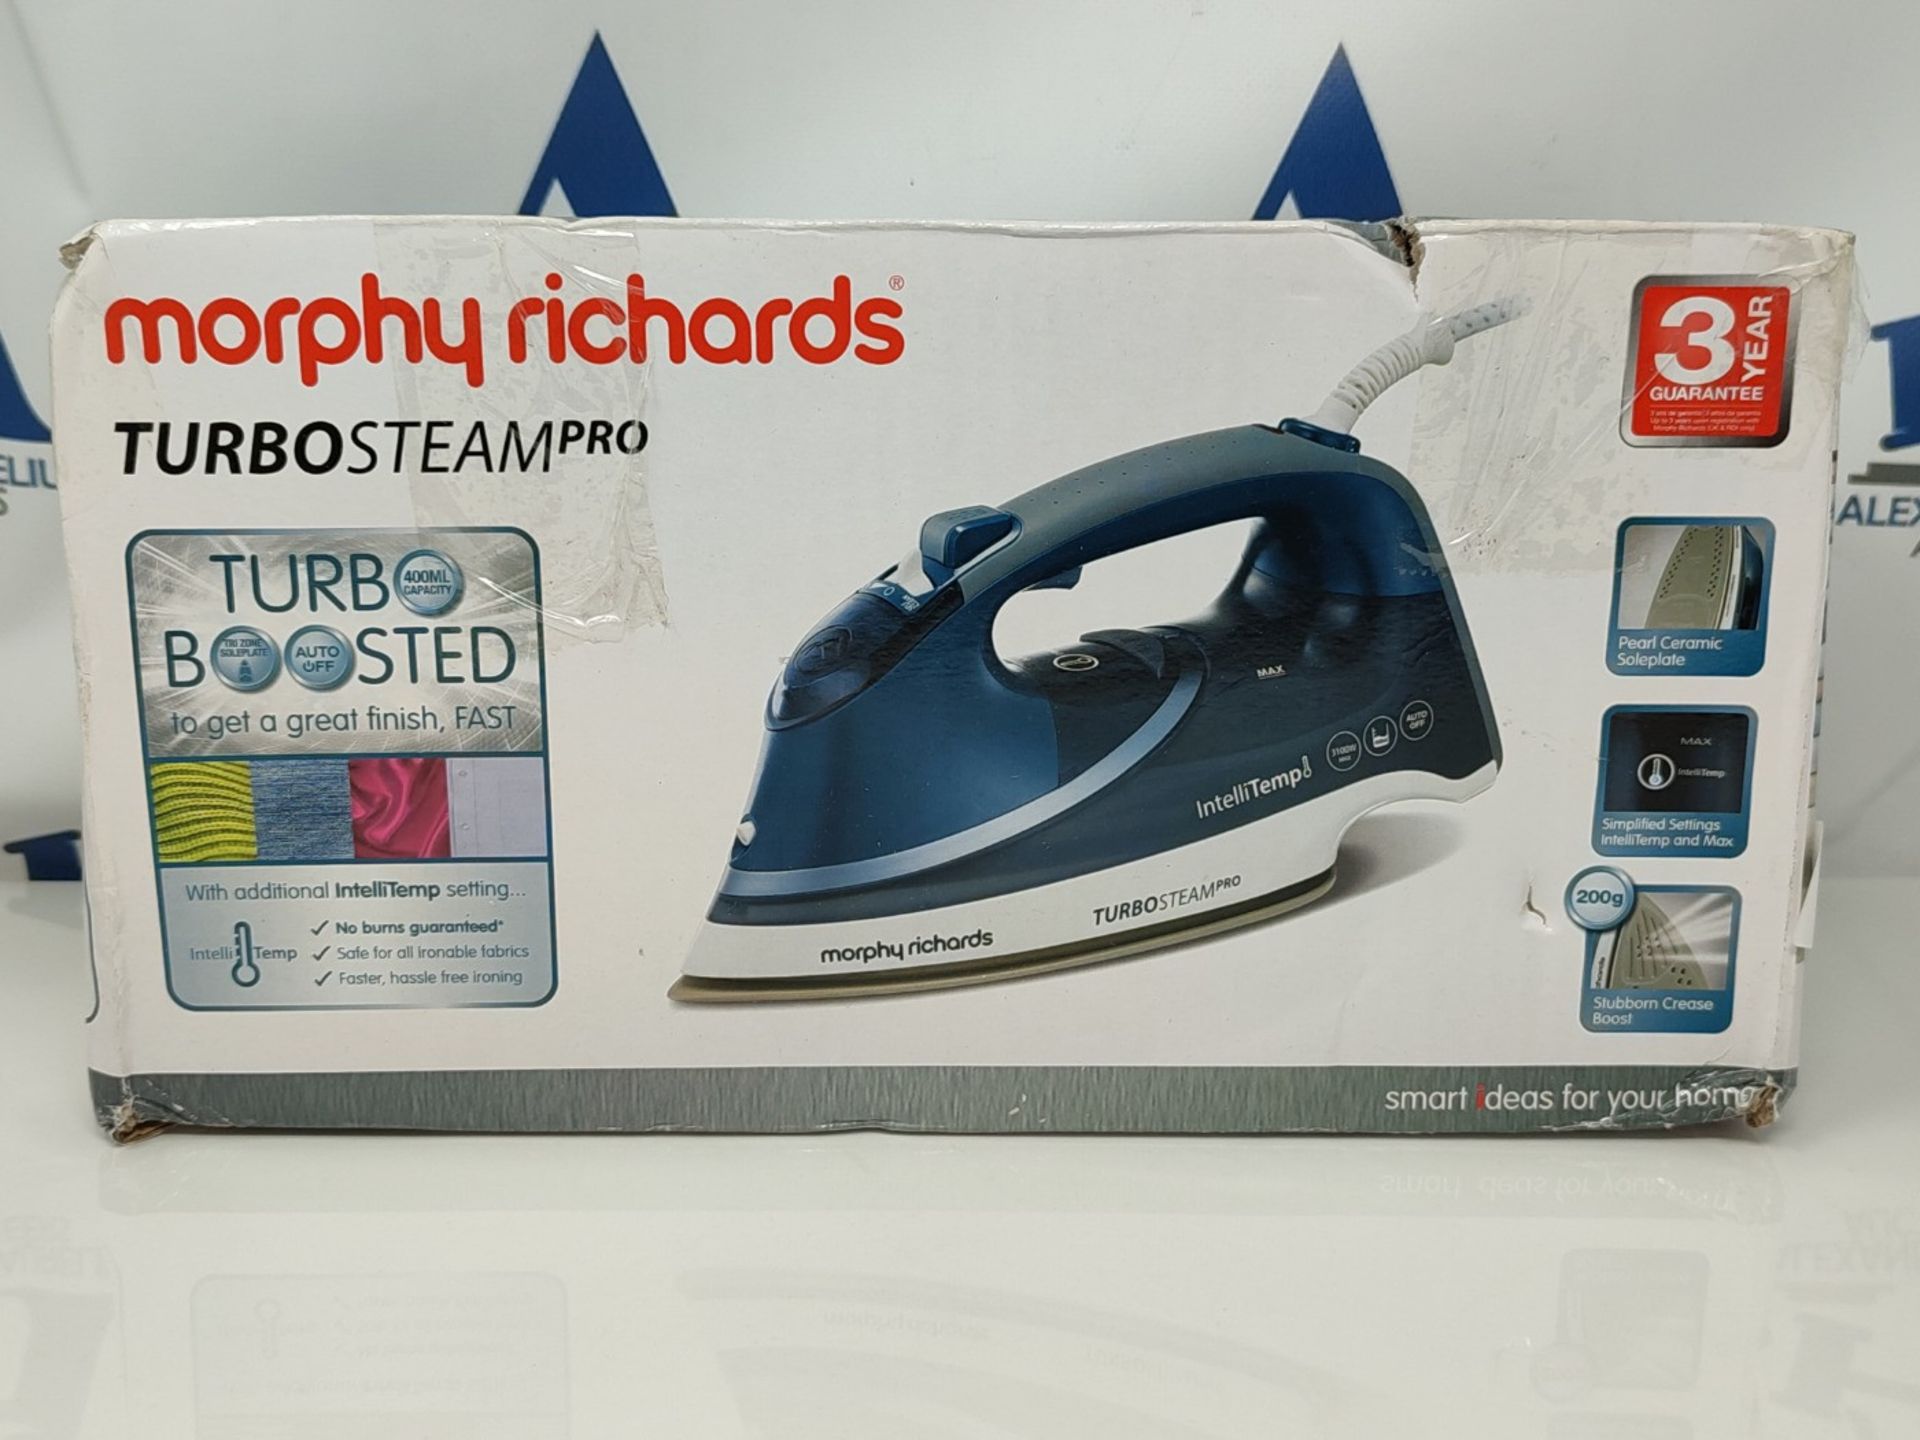 Morphy Richards Steam Iron 303131 Turbosteam Pro with Intellitemp Steam Iron, blue whi - Image 2 of 3